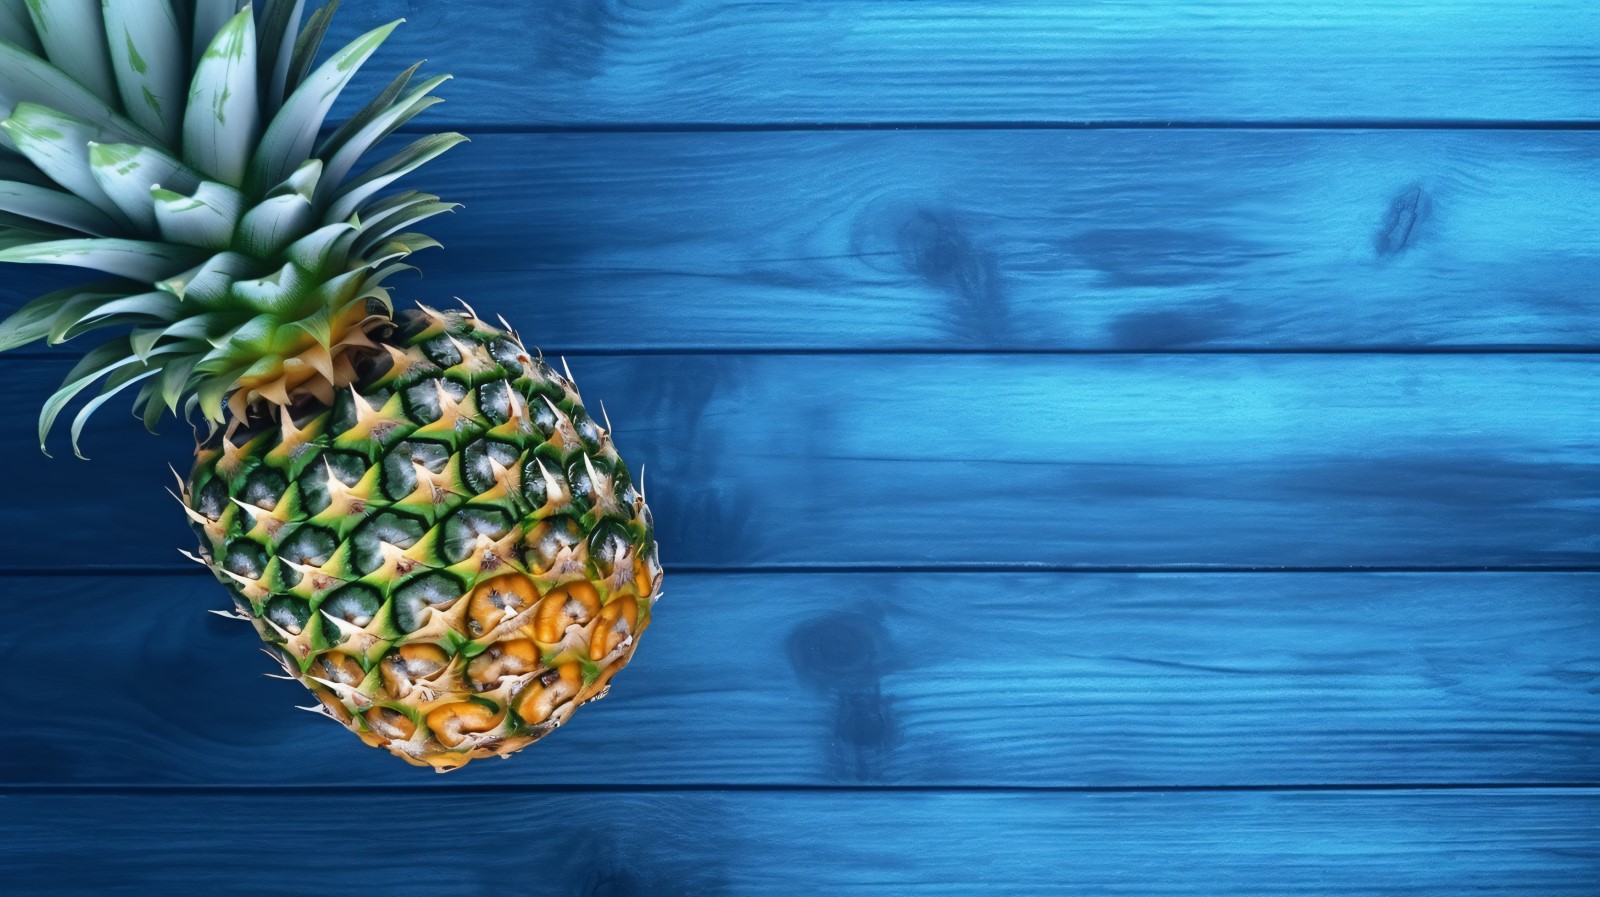 Slice pineapple with sticks on blue wooden background 282